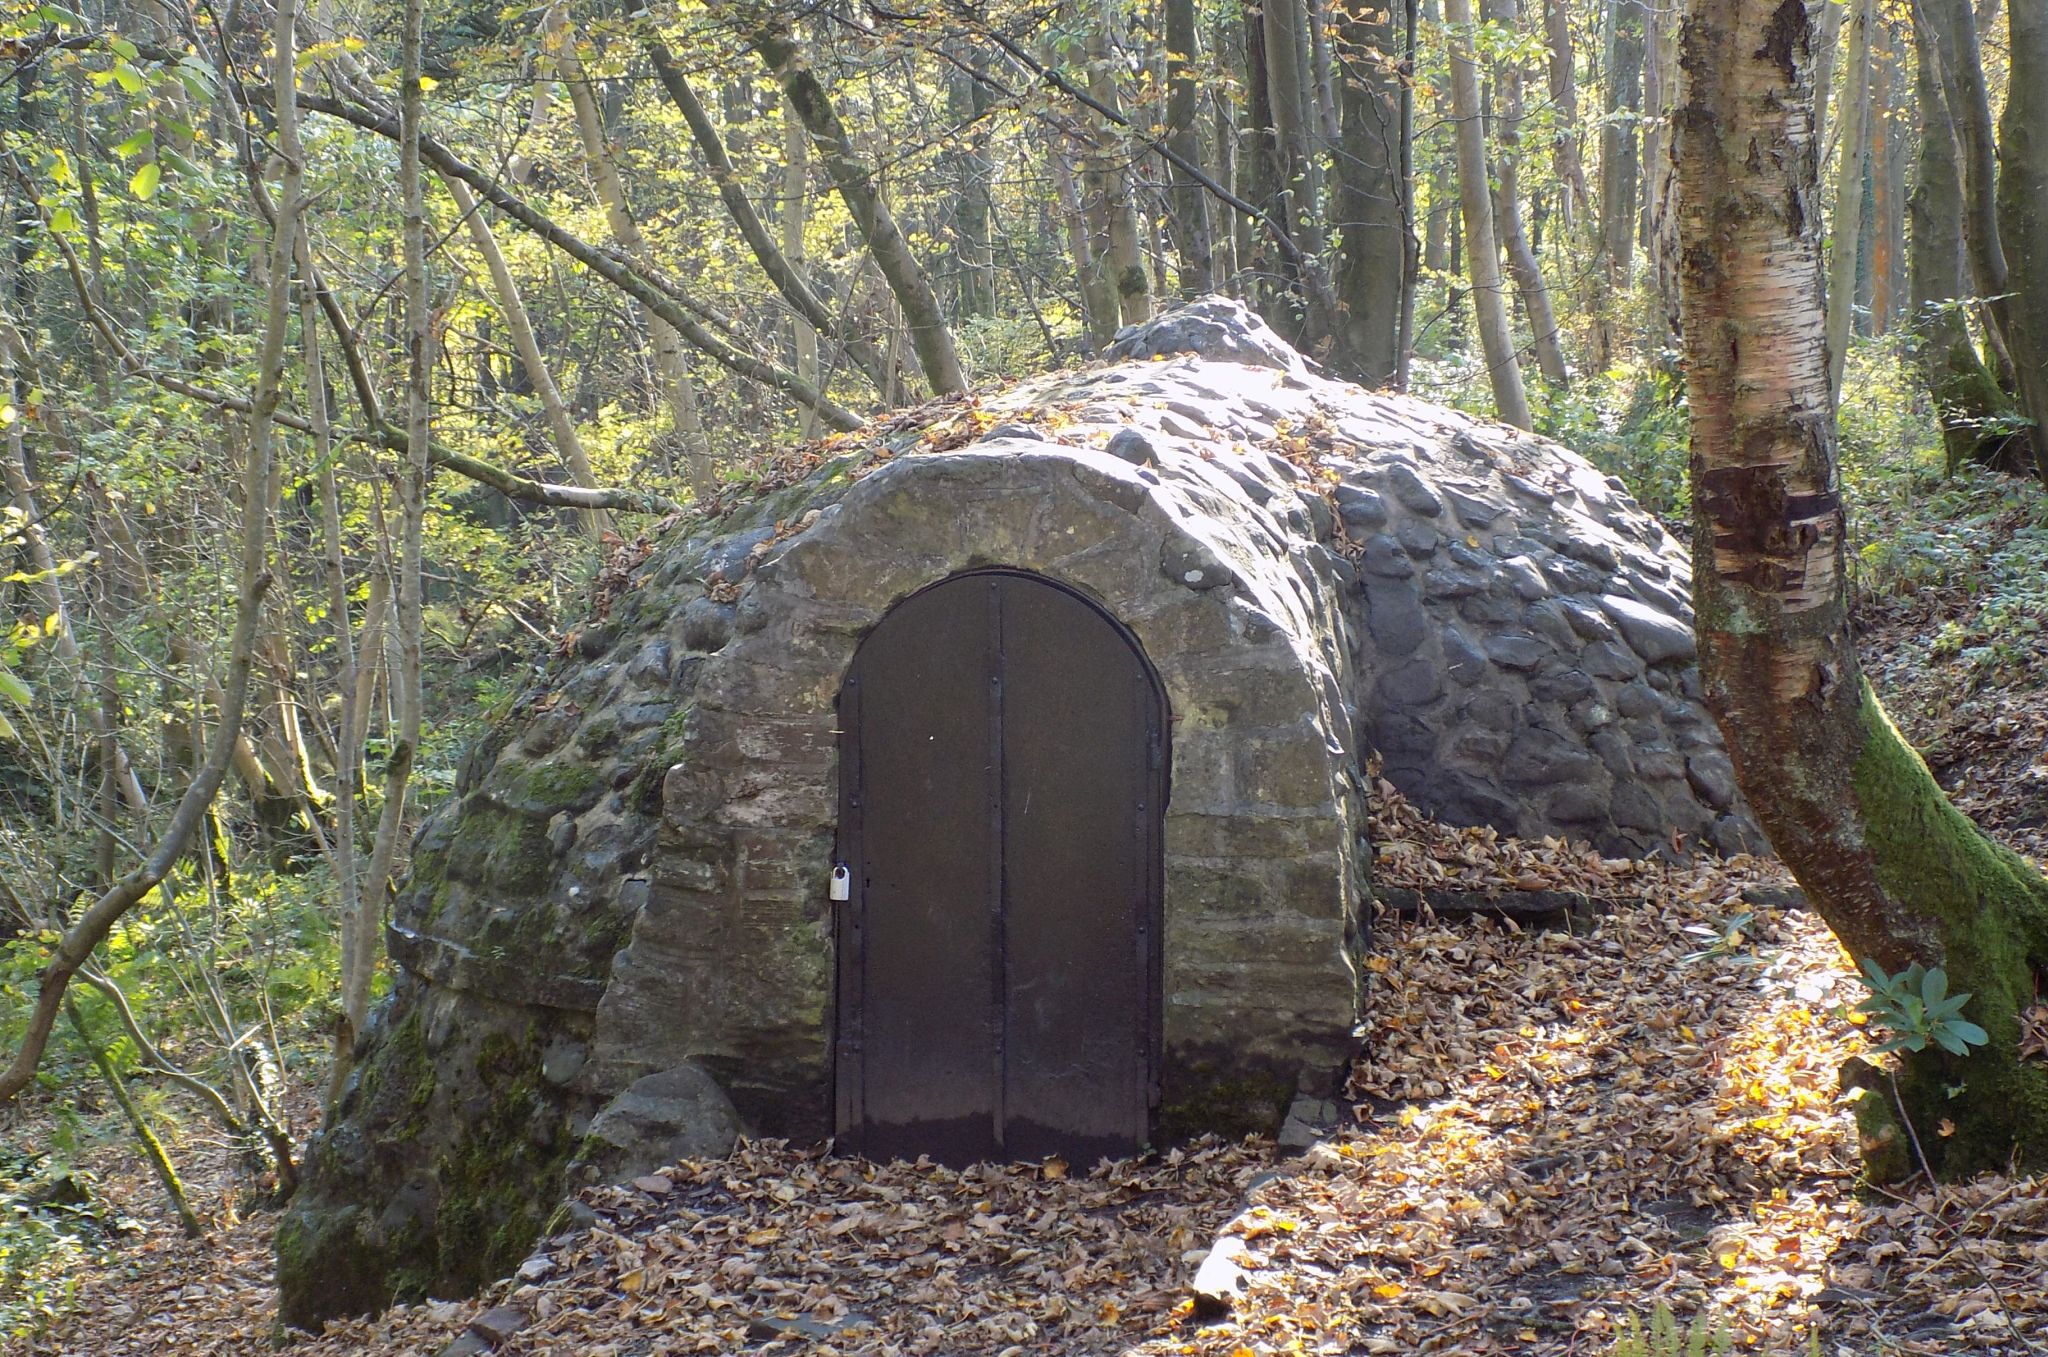 The Ice House in Eglinton Country Park